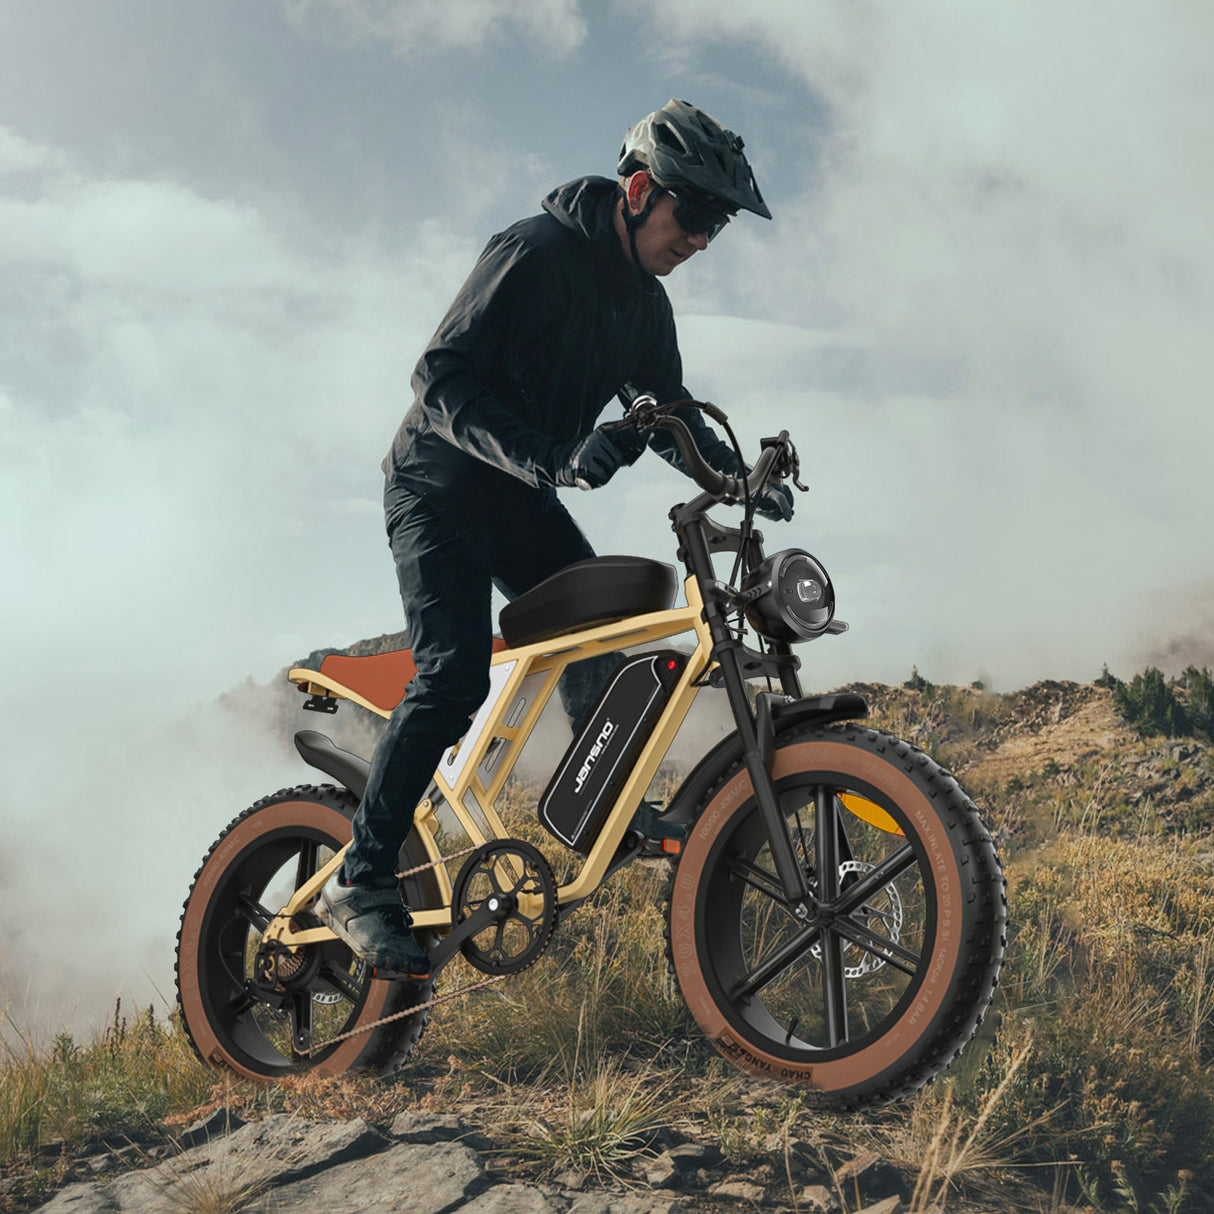 JANSNO X70 Off Road Electric Bike for Adults, 48V 34Ah Dual Battery, 750W Powerful Motor